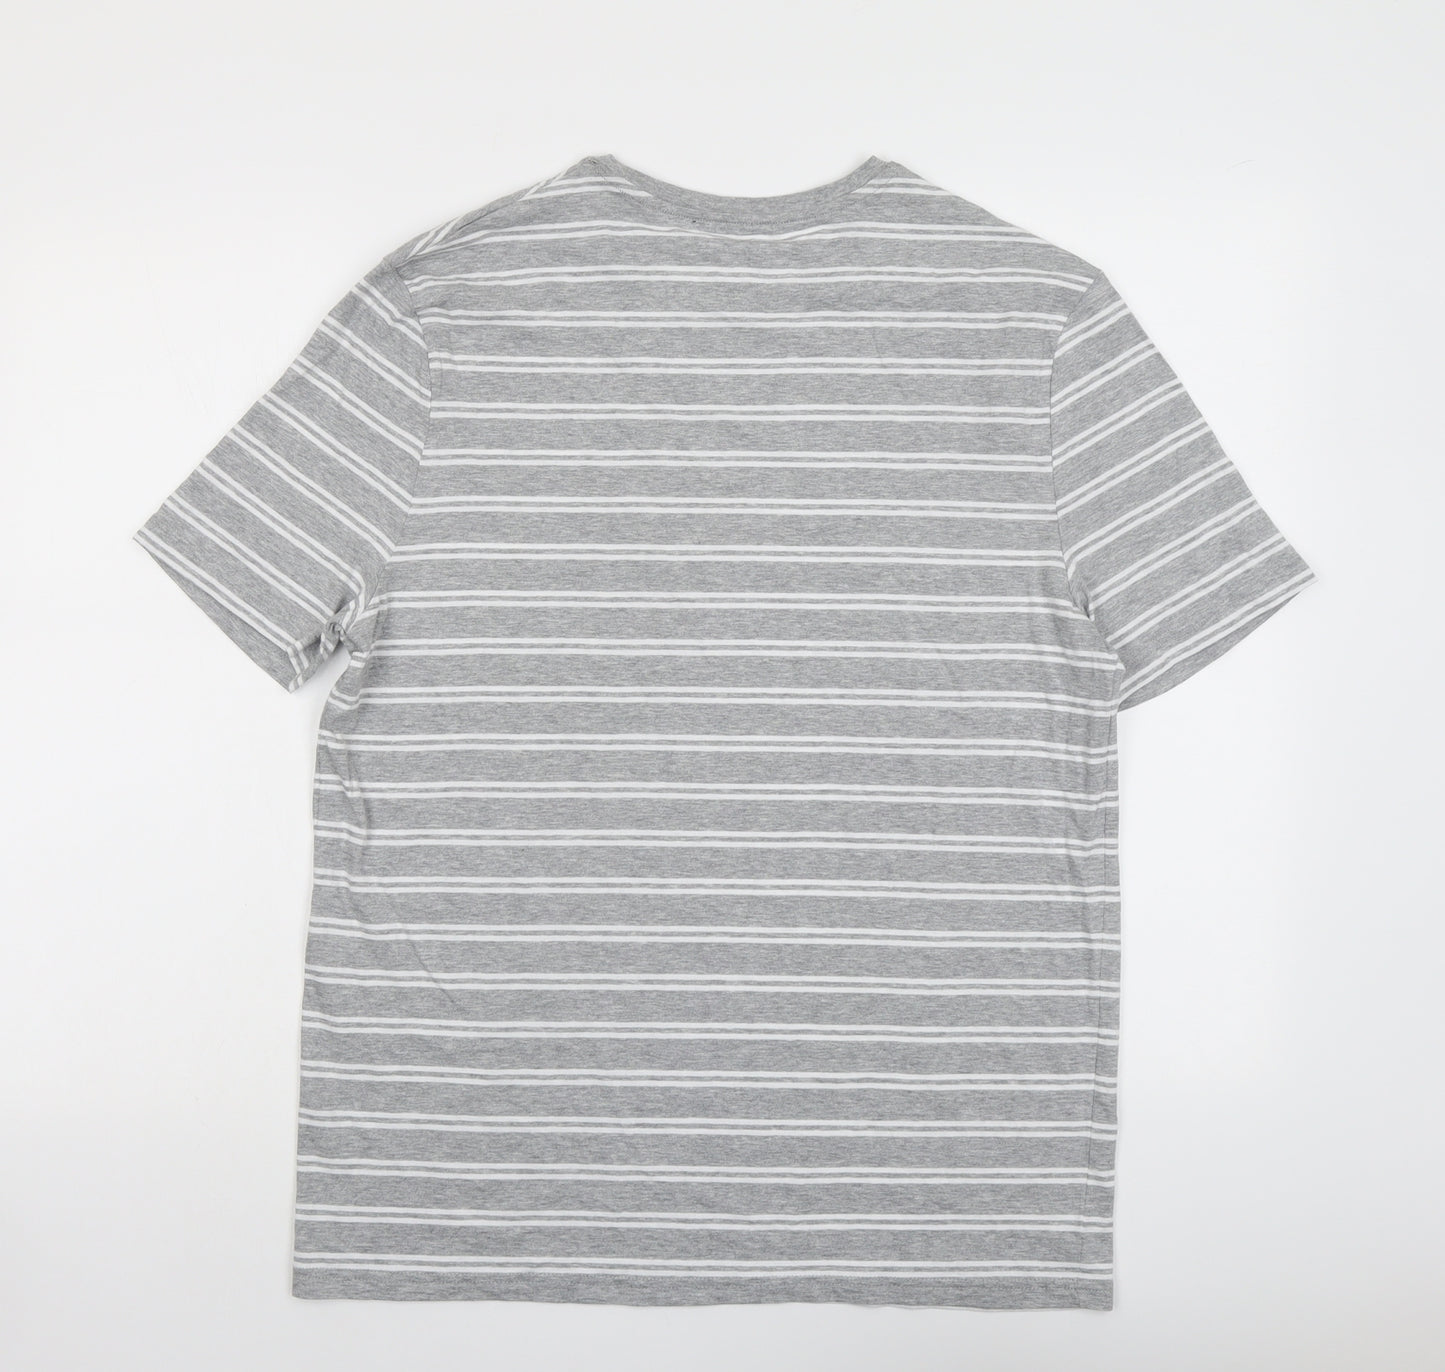 Marks and Spencer Mens Grey Striped Cotton T-Shirt Size M Round Neck